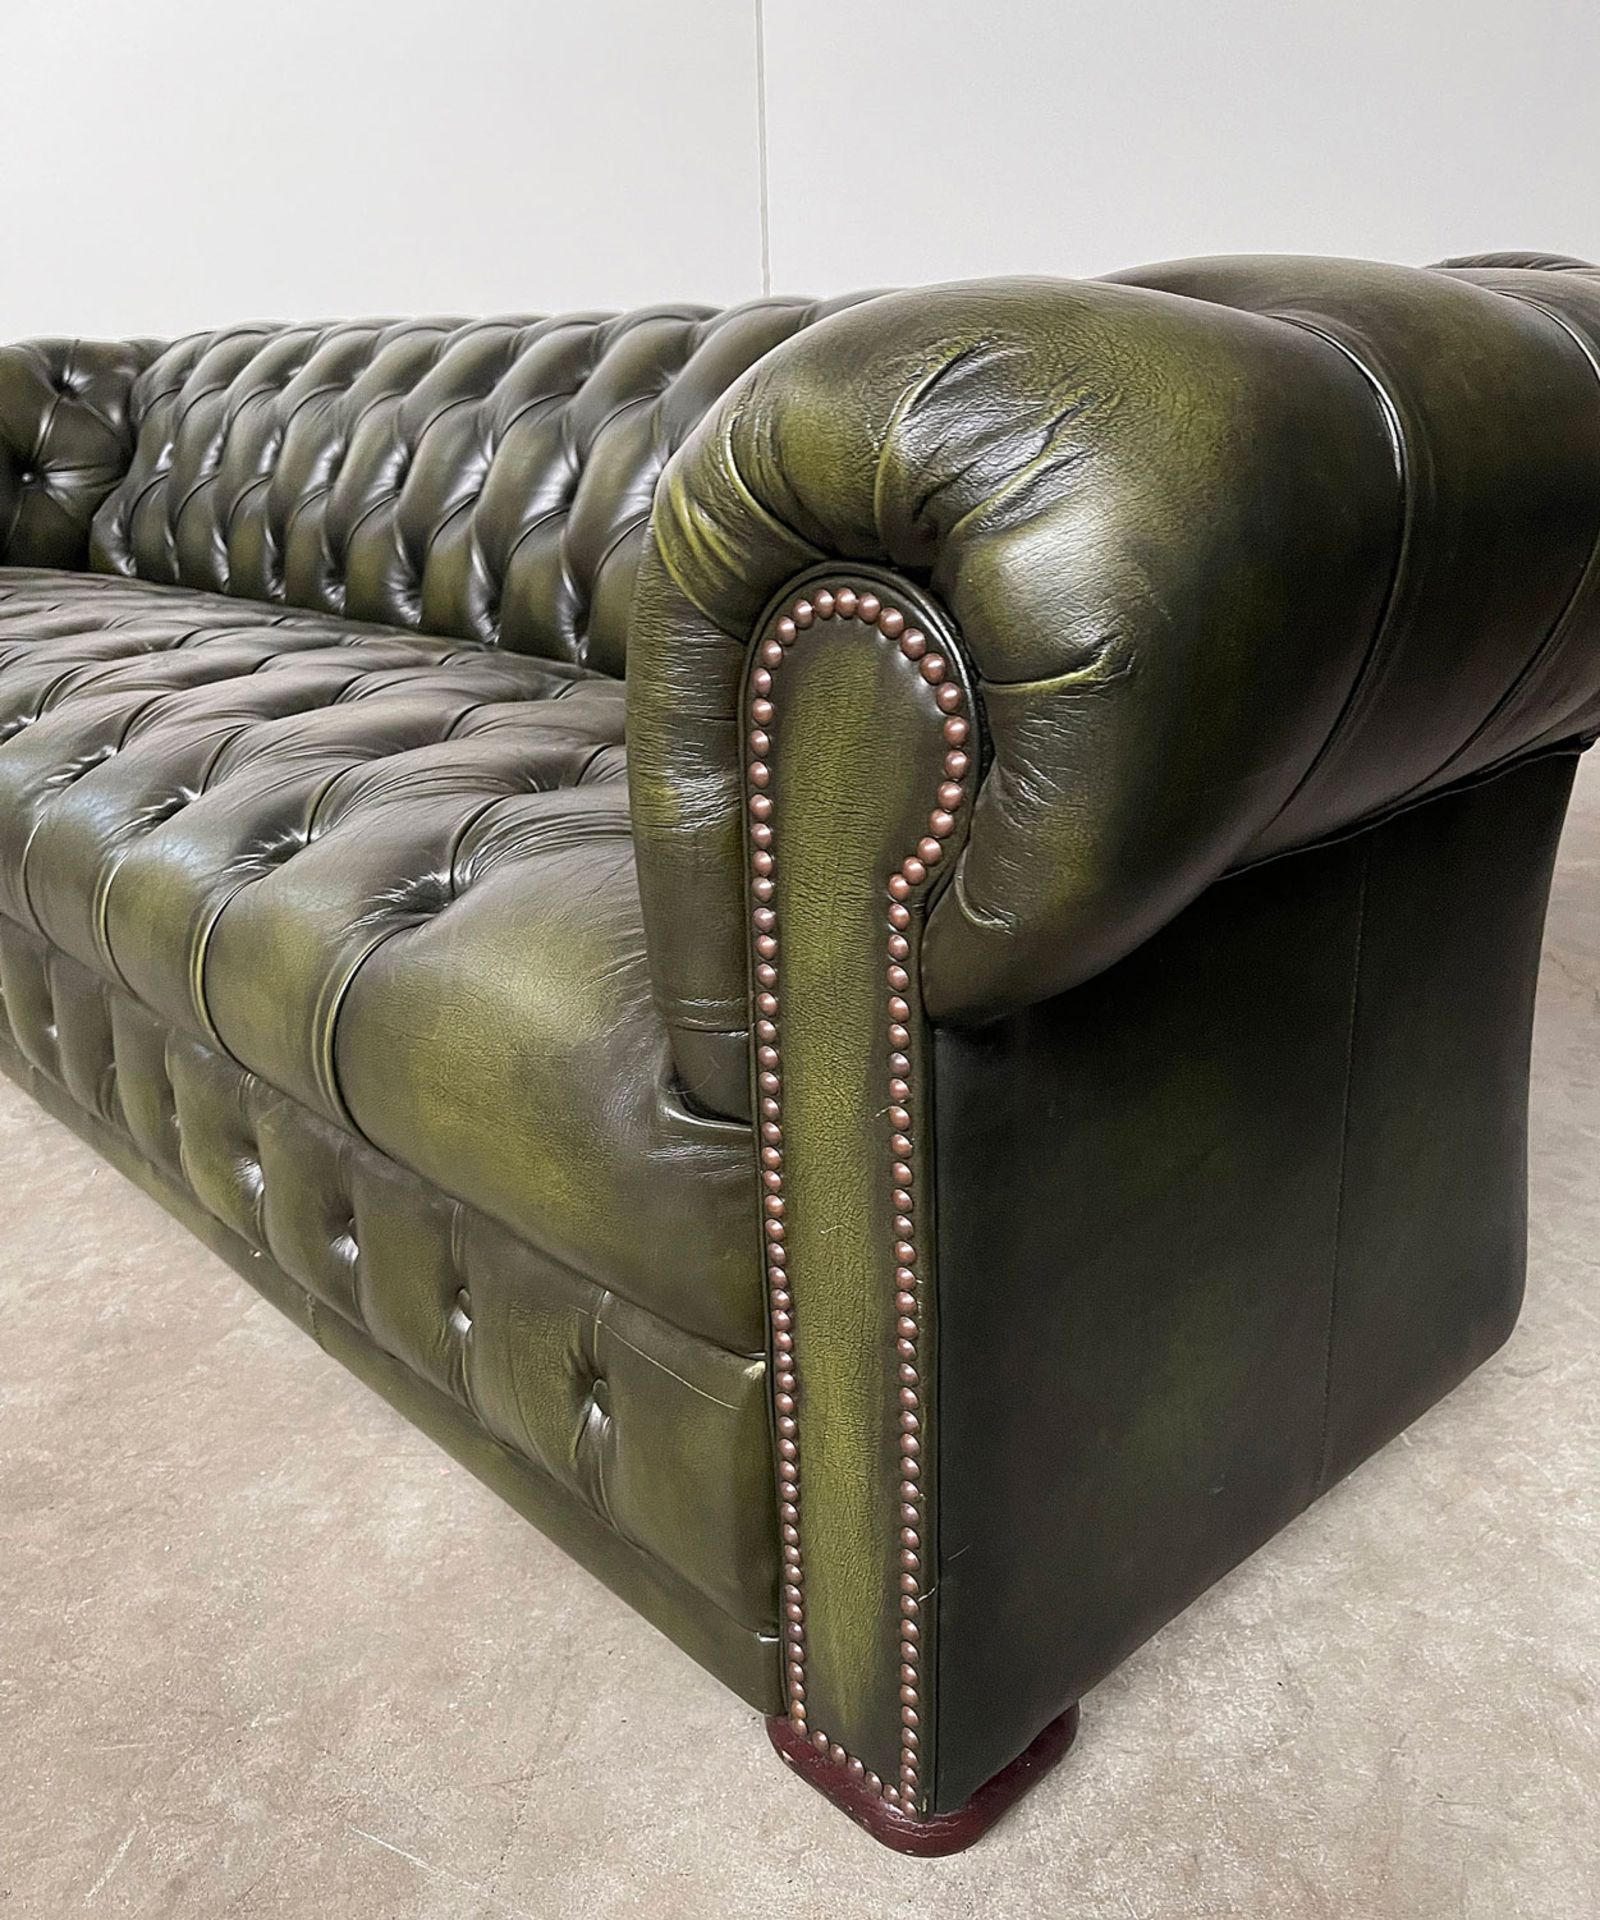 Green Leather Chesterfield Sofa - Image 10 of 10